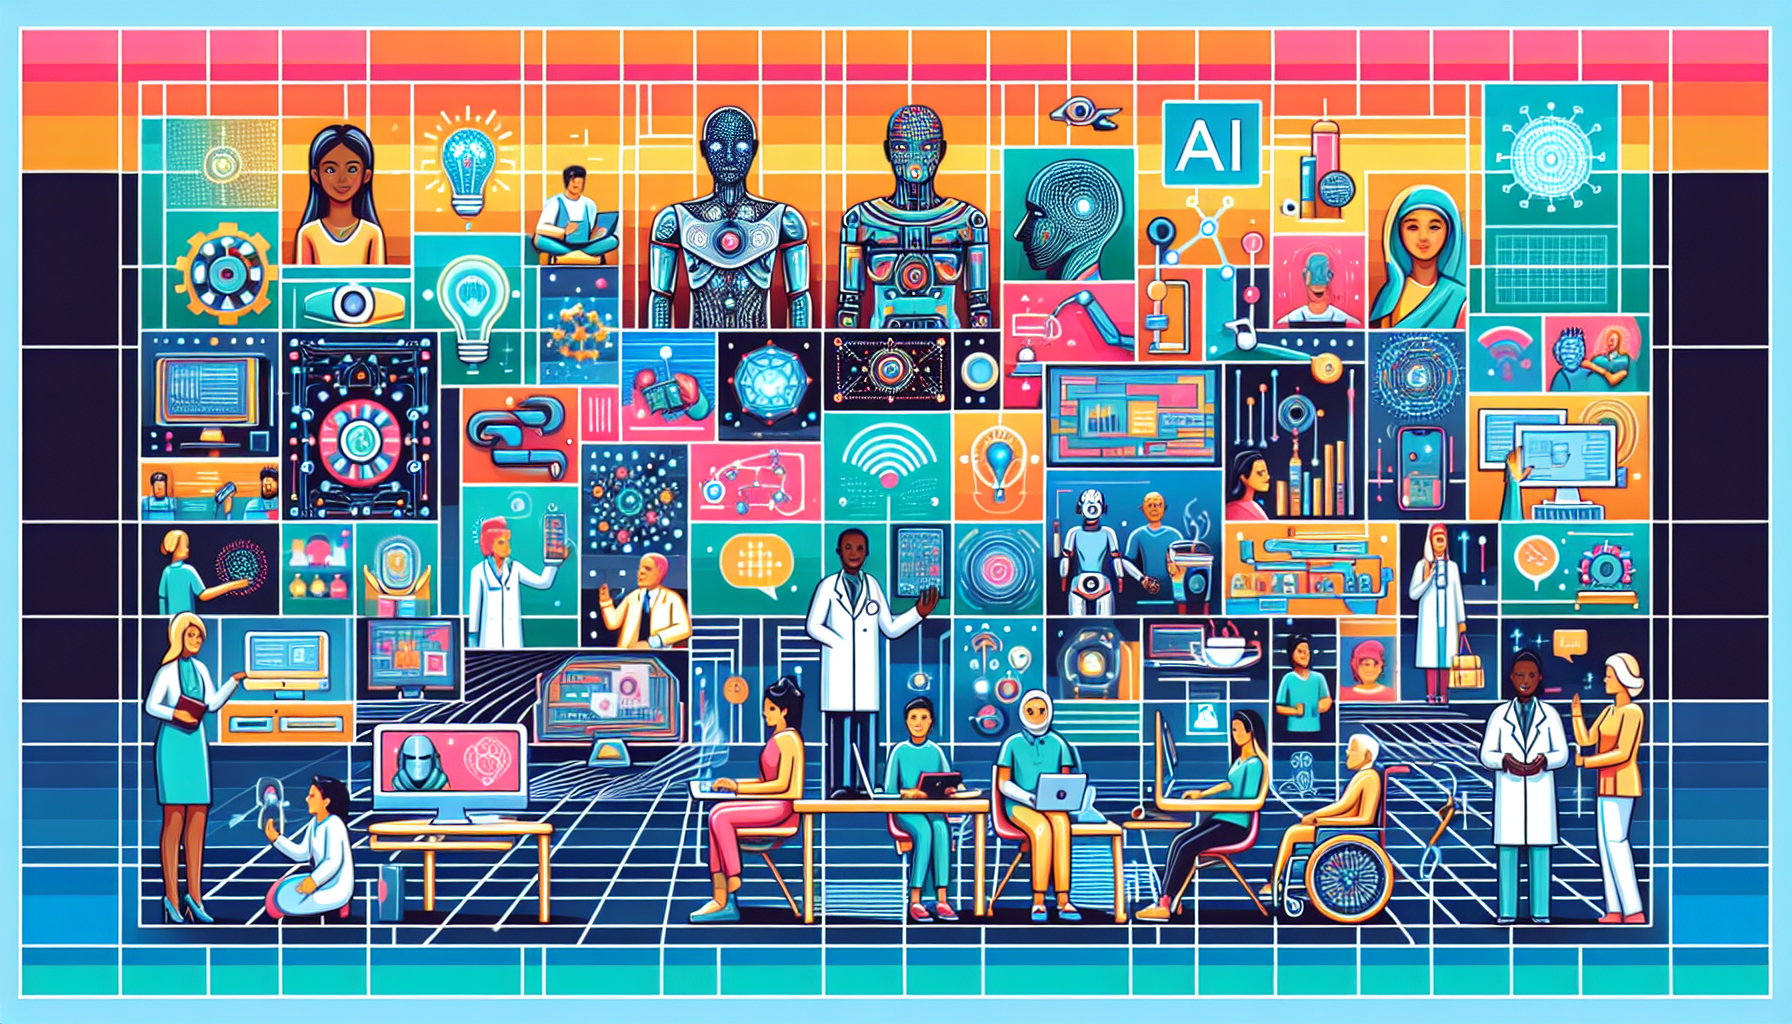 Title: The Future of AI: A Human-Centric Approach to Innovation